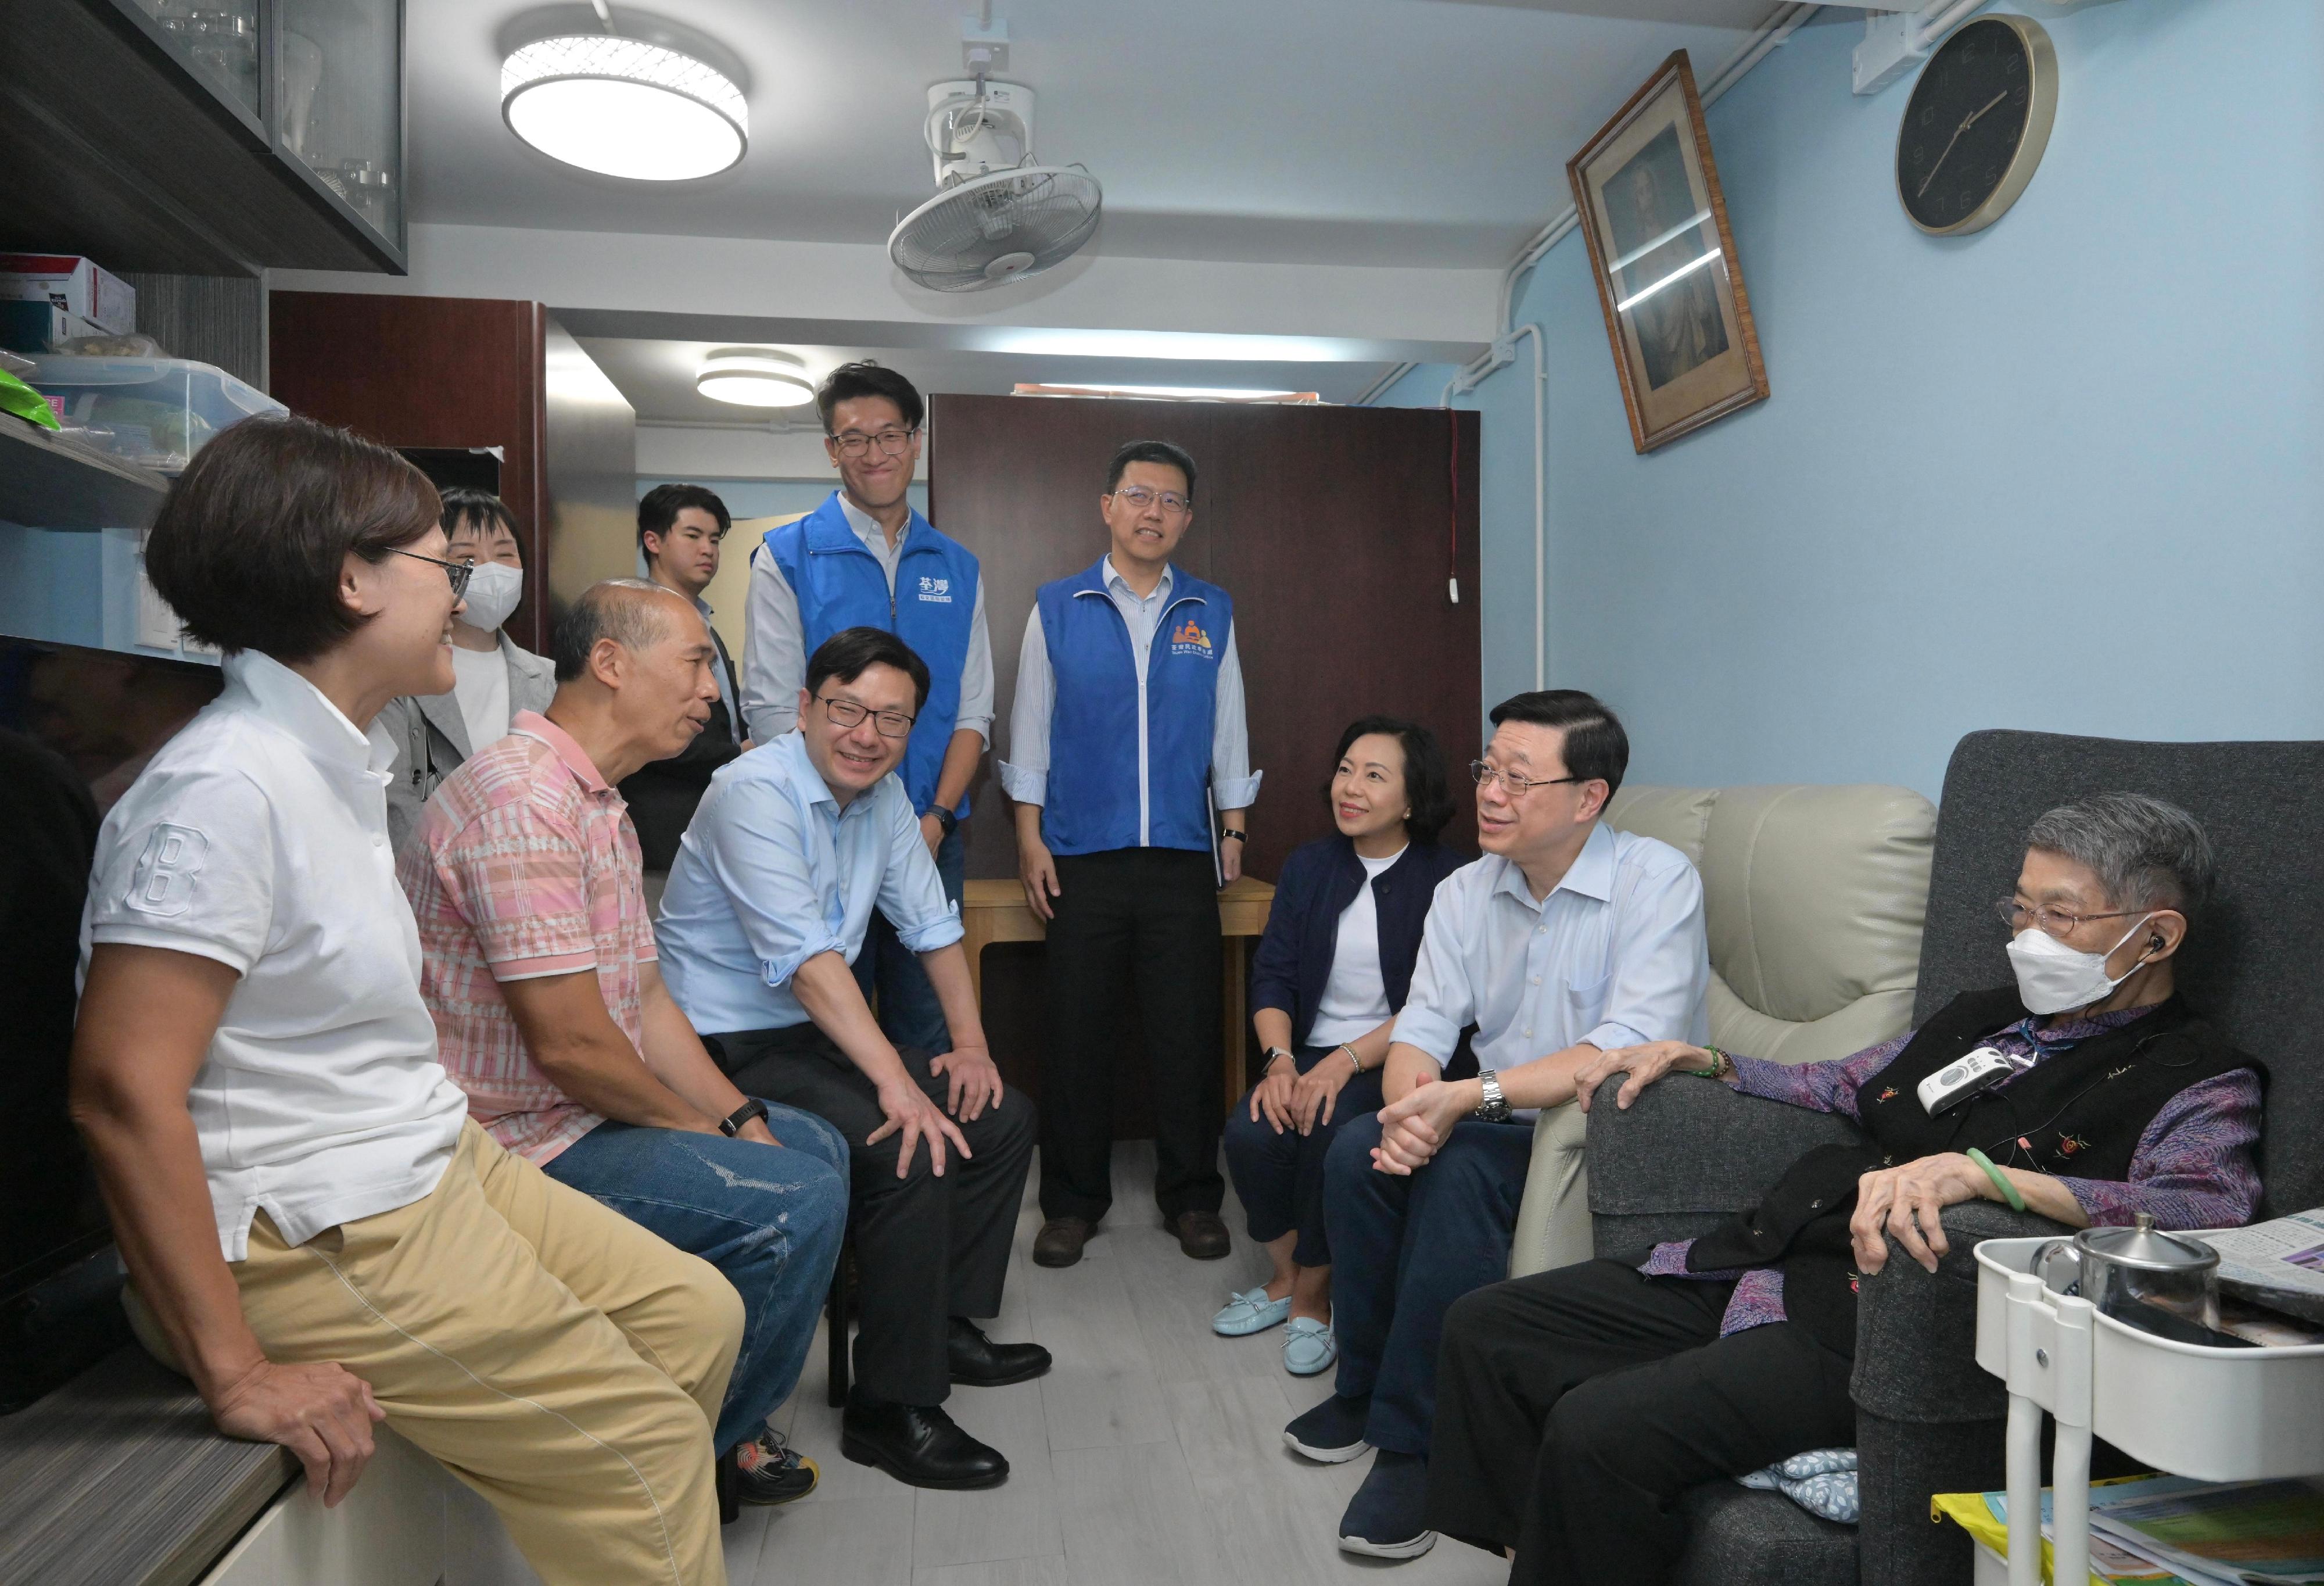 The Chief Executive, Mr John Lee, visited Tsuen Wan to gather public views on the upcoming Policy Address today (September 15). Photo shows Mr Lee (second right), accompanied by the Secretary for Home and Youth Affairs, Miss Alice Mak (third right); the Secretary for Labour and Welfare, Mr Chris Sun (front row, third left); the Director of Social Welfare, Miss Charmaine Lee (back row, first left); the District Officer (Tsuen Wan), Mr Billy Au (fourth right); and the Captain of the District Services and Community Care Teams in the Tsuen Wan District, Mr Kot Siu-yuen (fifth right), visiting elderly people and carers to understand their living conditions.